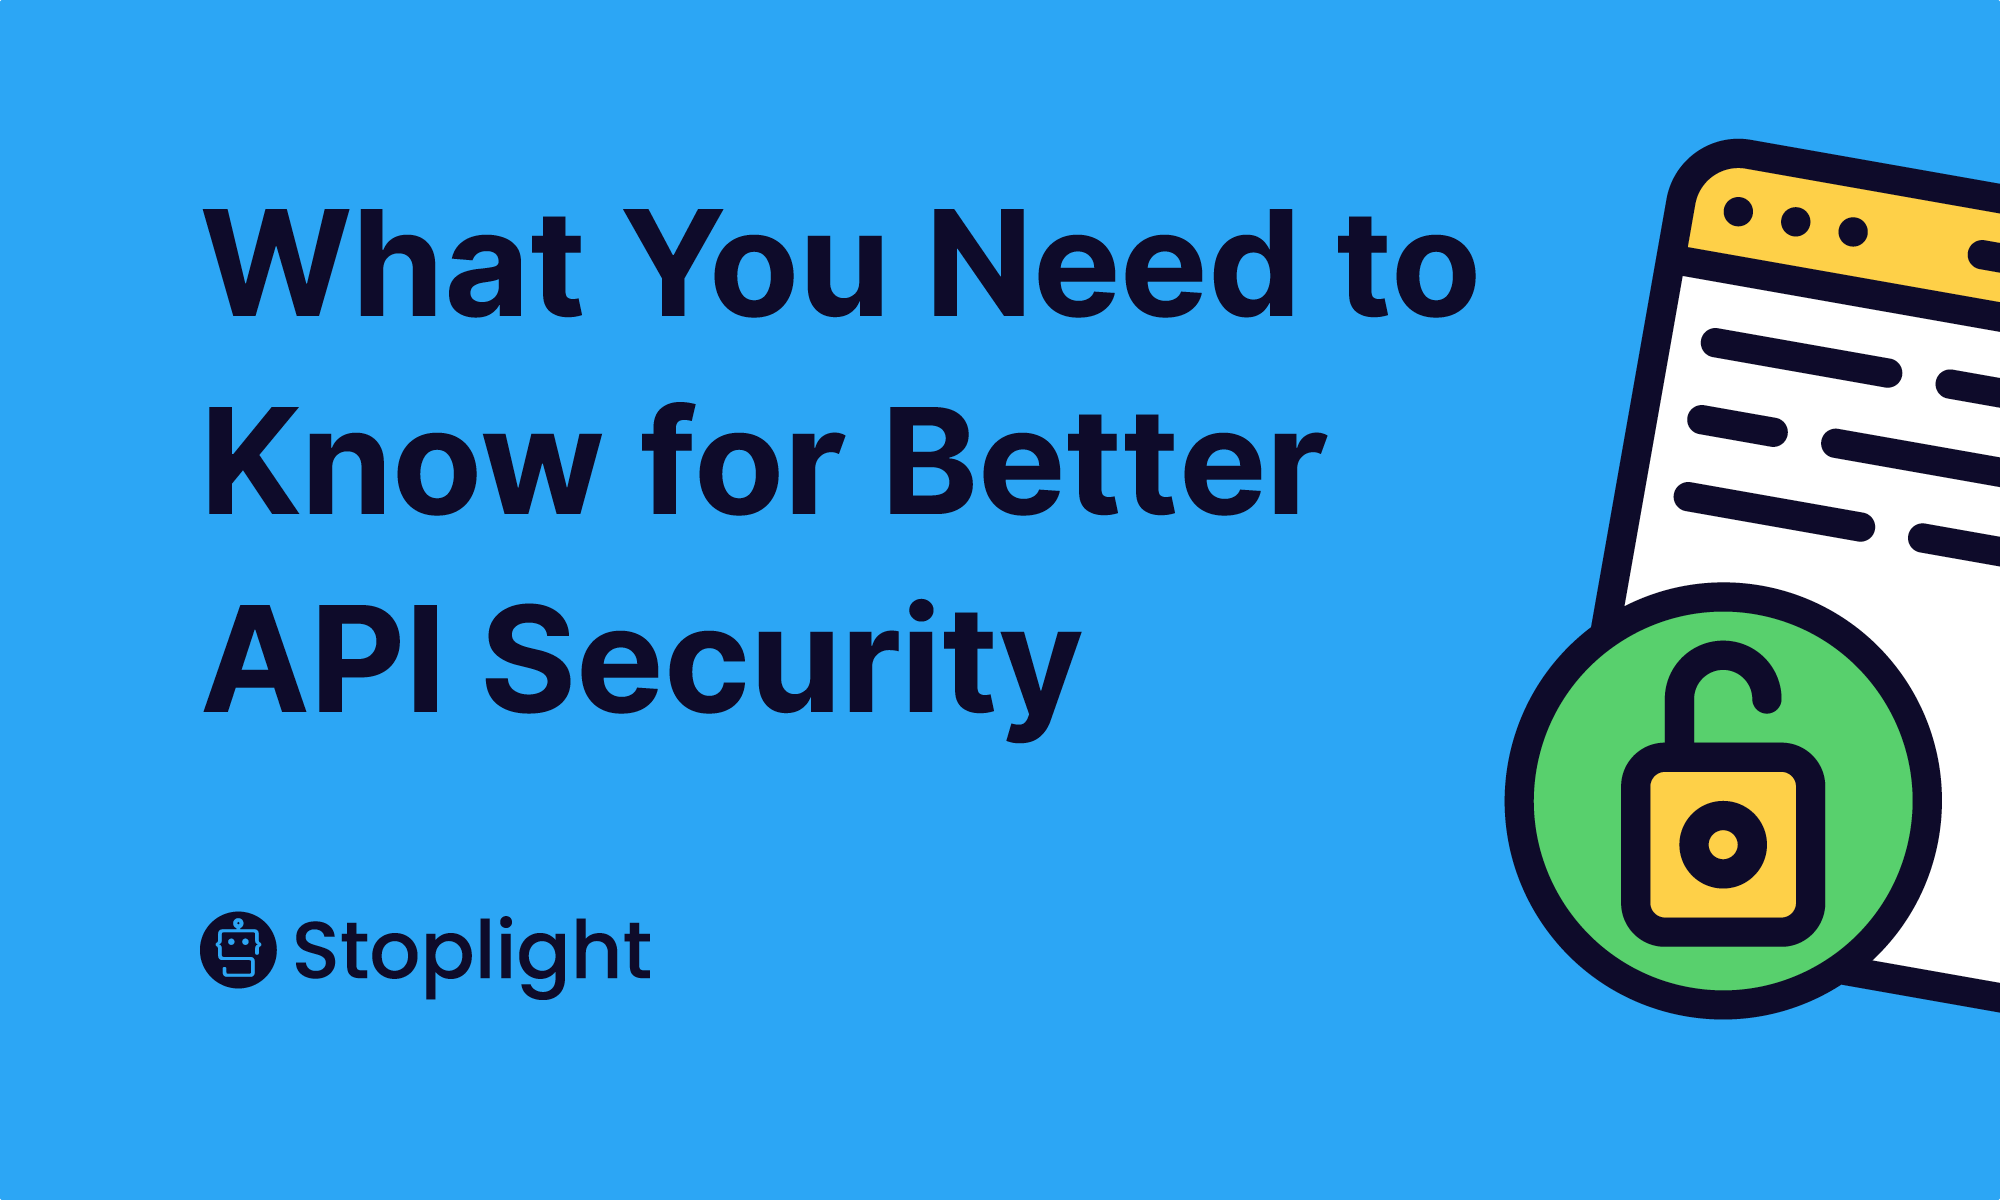 What to Know For Better API Security Beyond the Design Phase